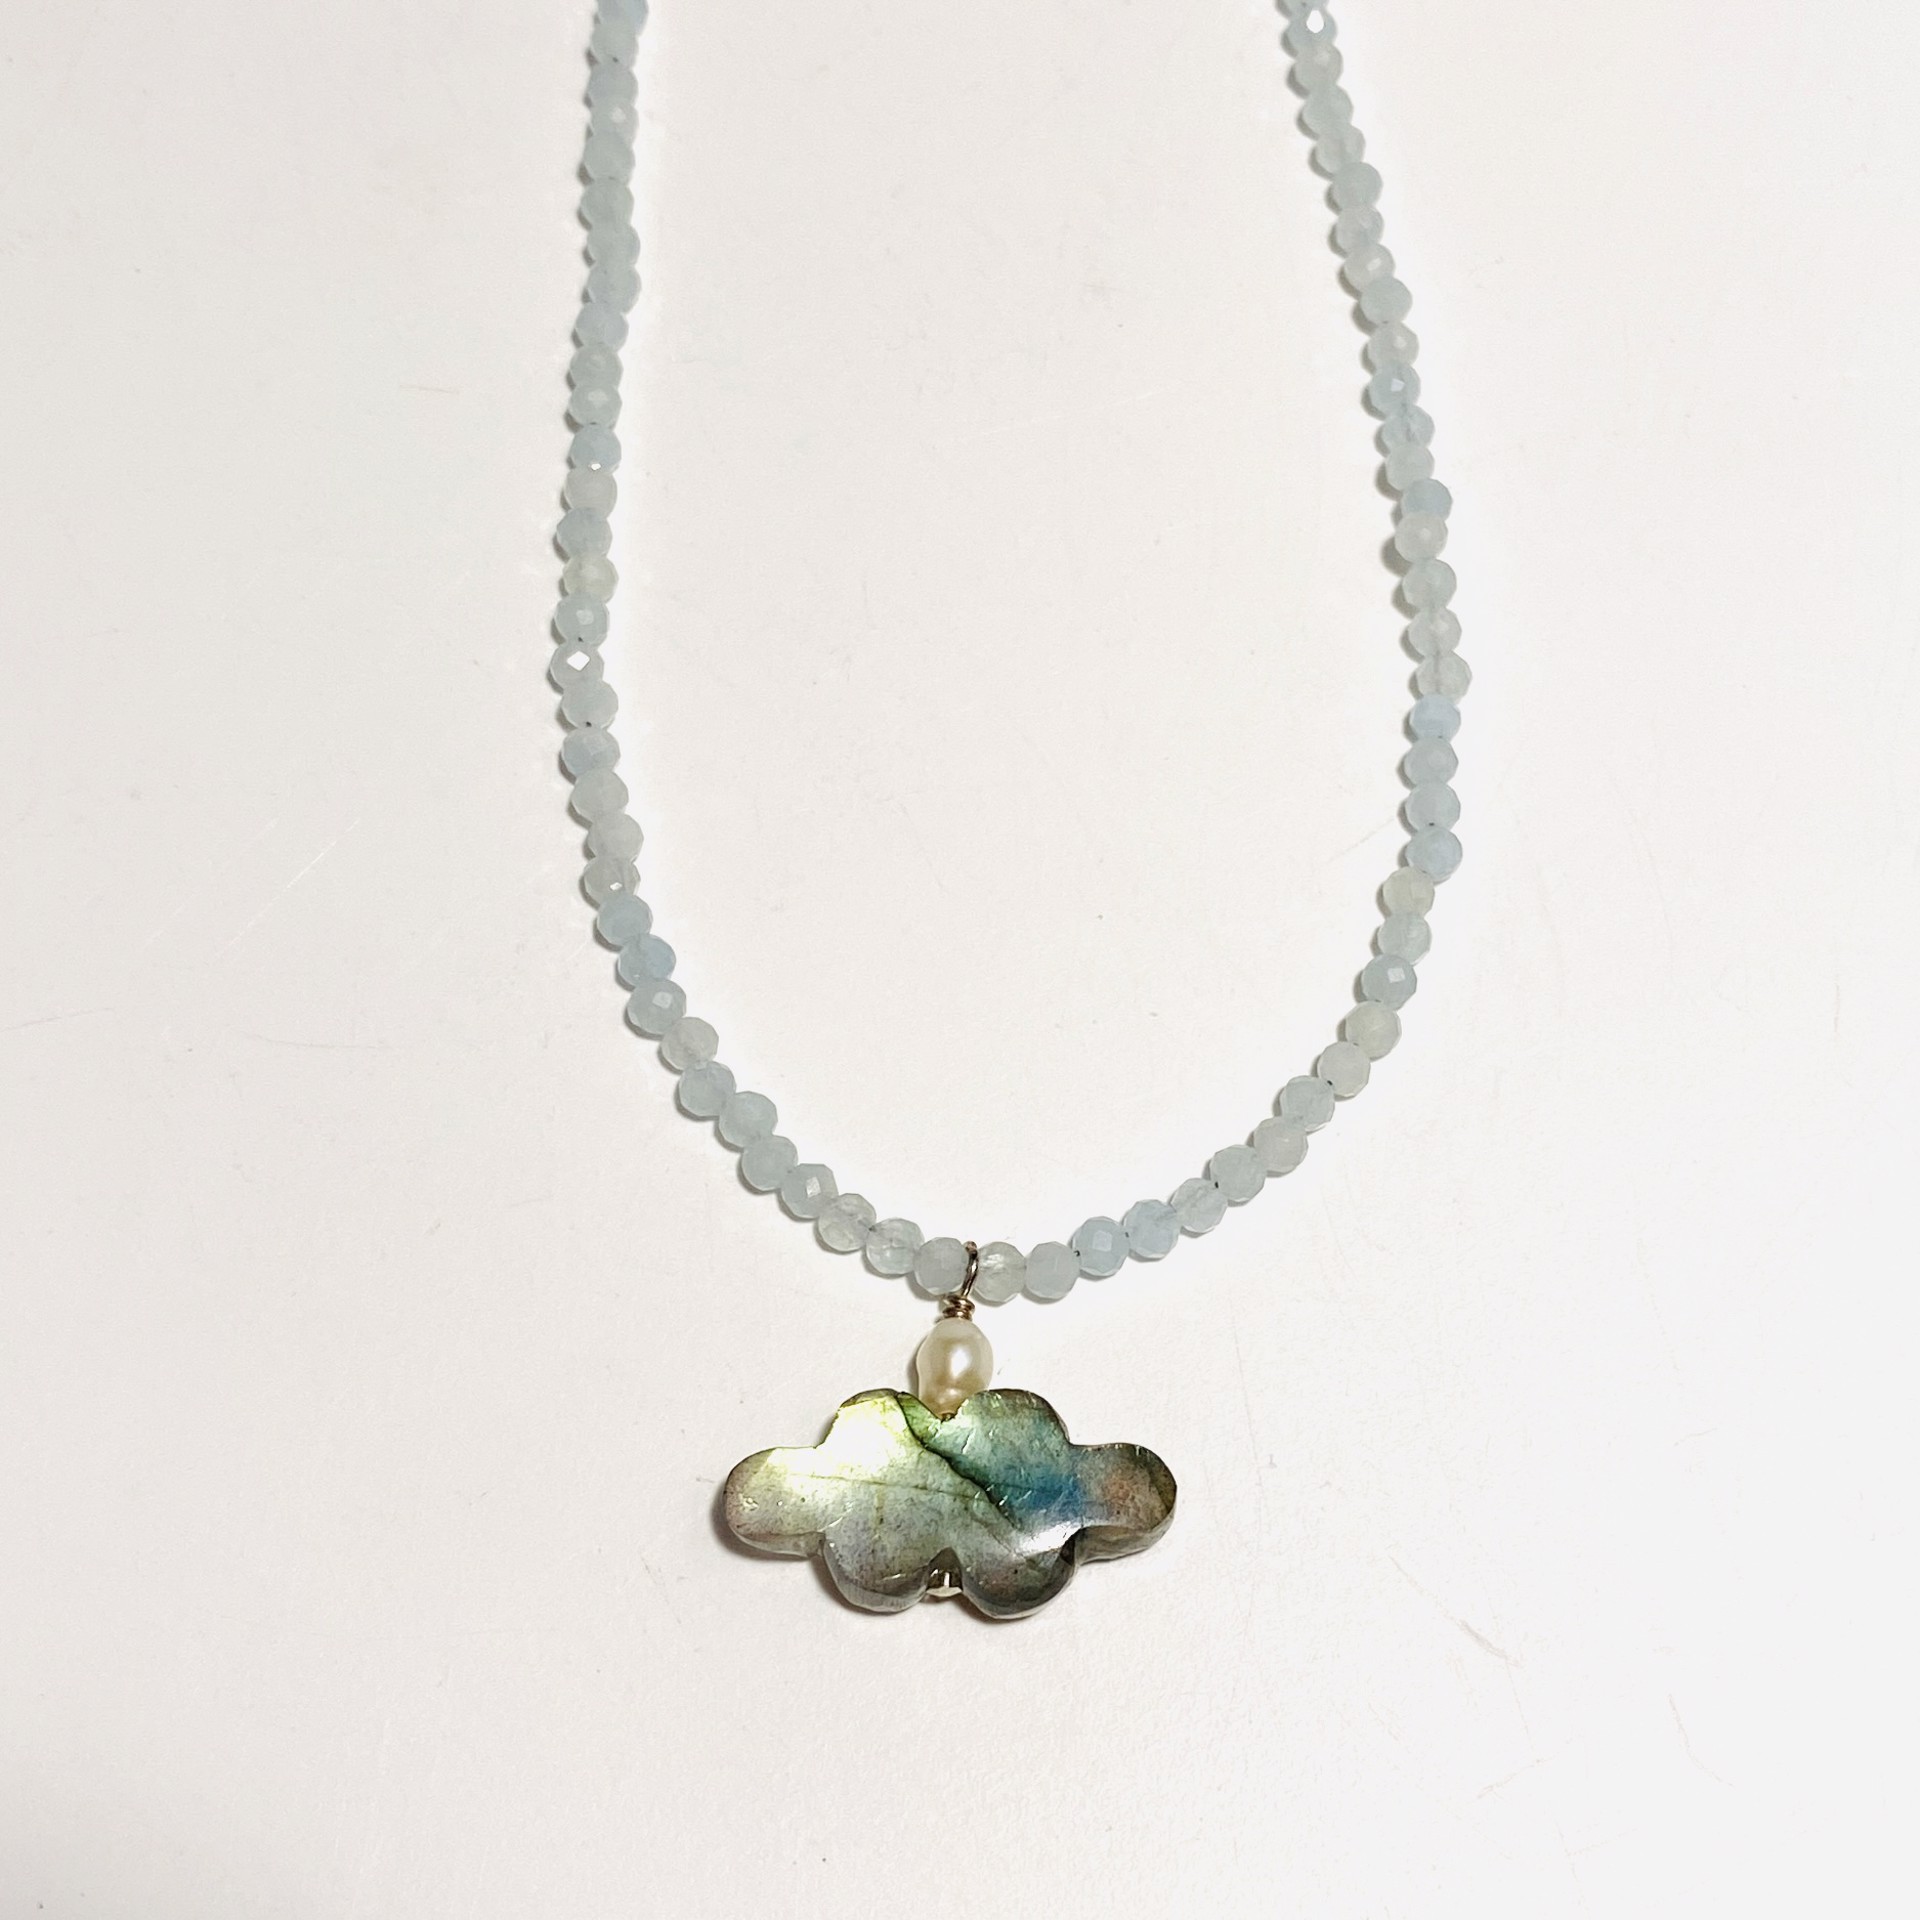 Faceted Aquamarine Labradorite Cloud Drop Necklace NT22-193 by Nance Trueworthy